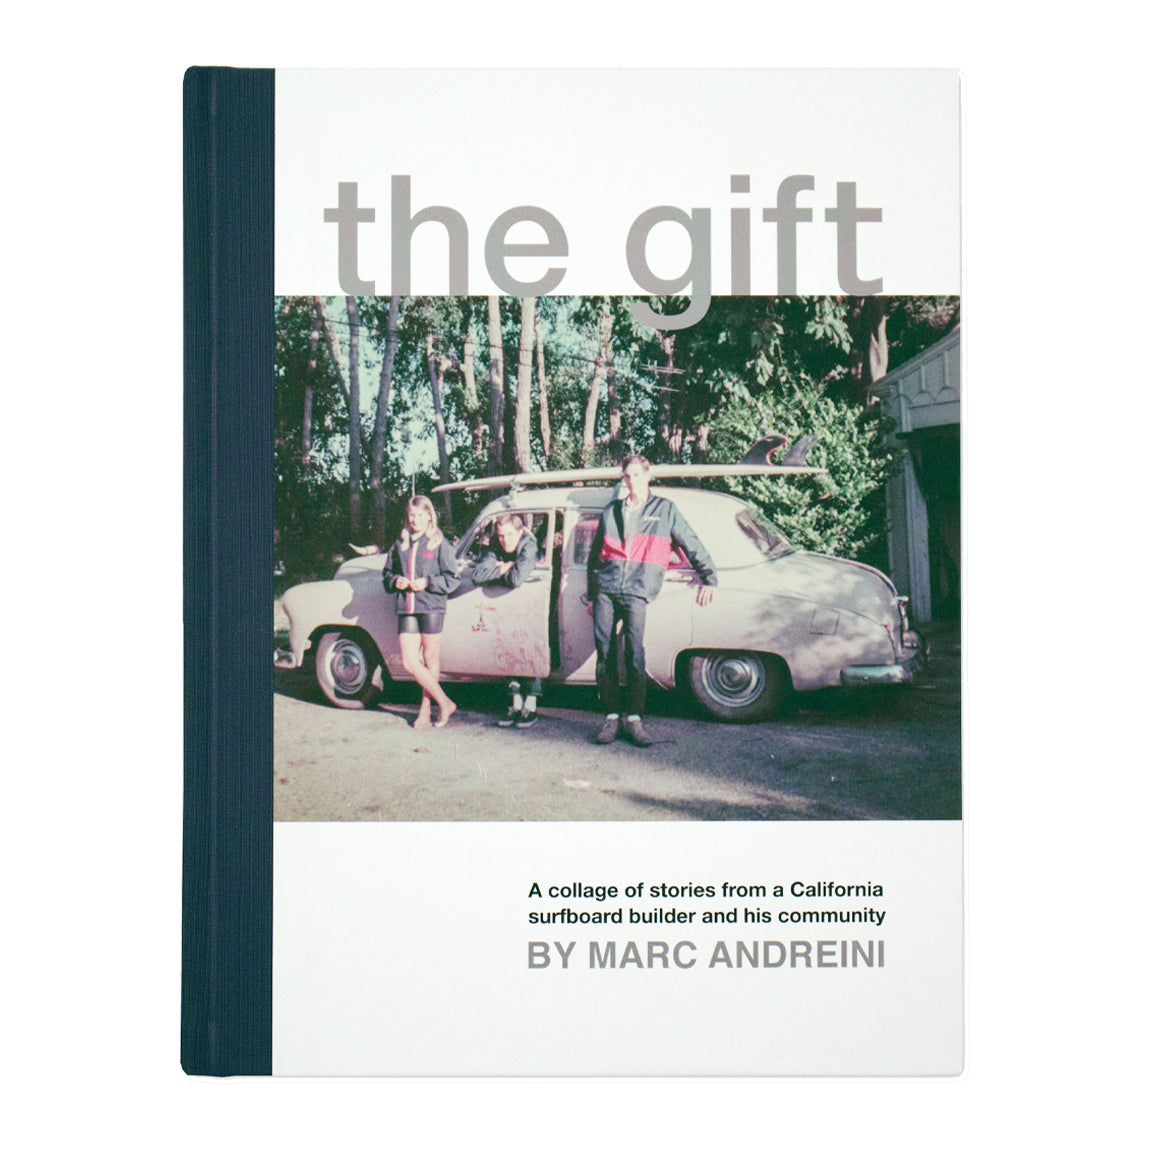 THE GIFT BY MARC ANDREINI